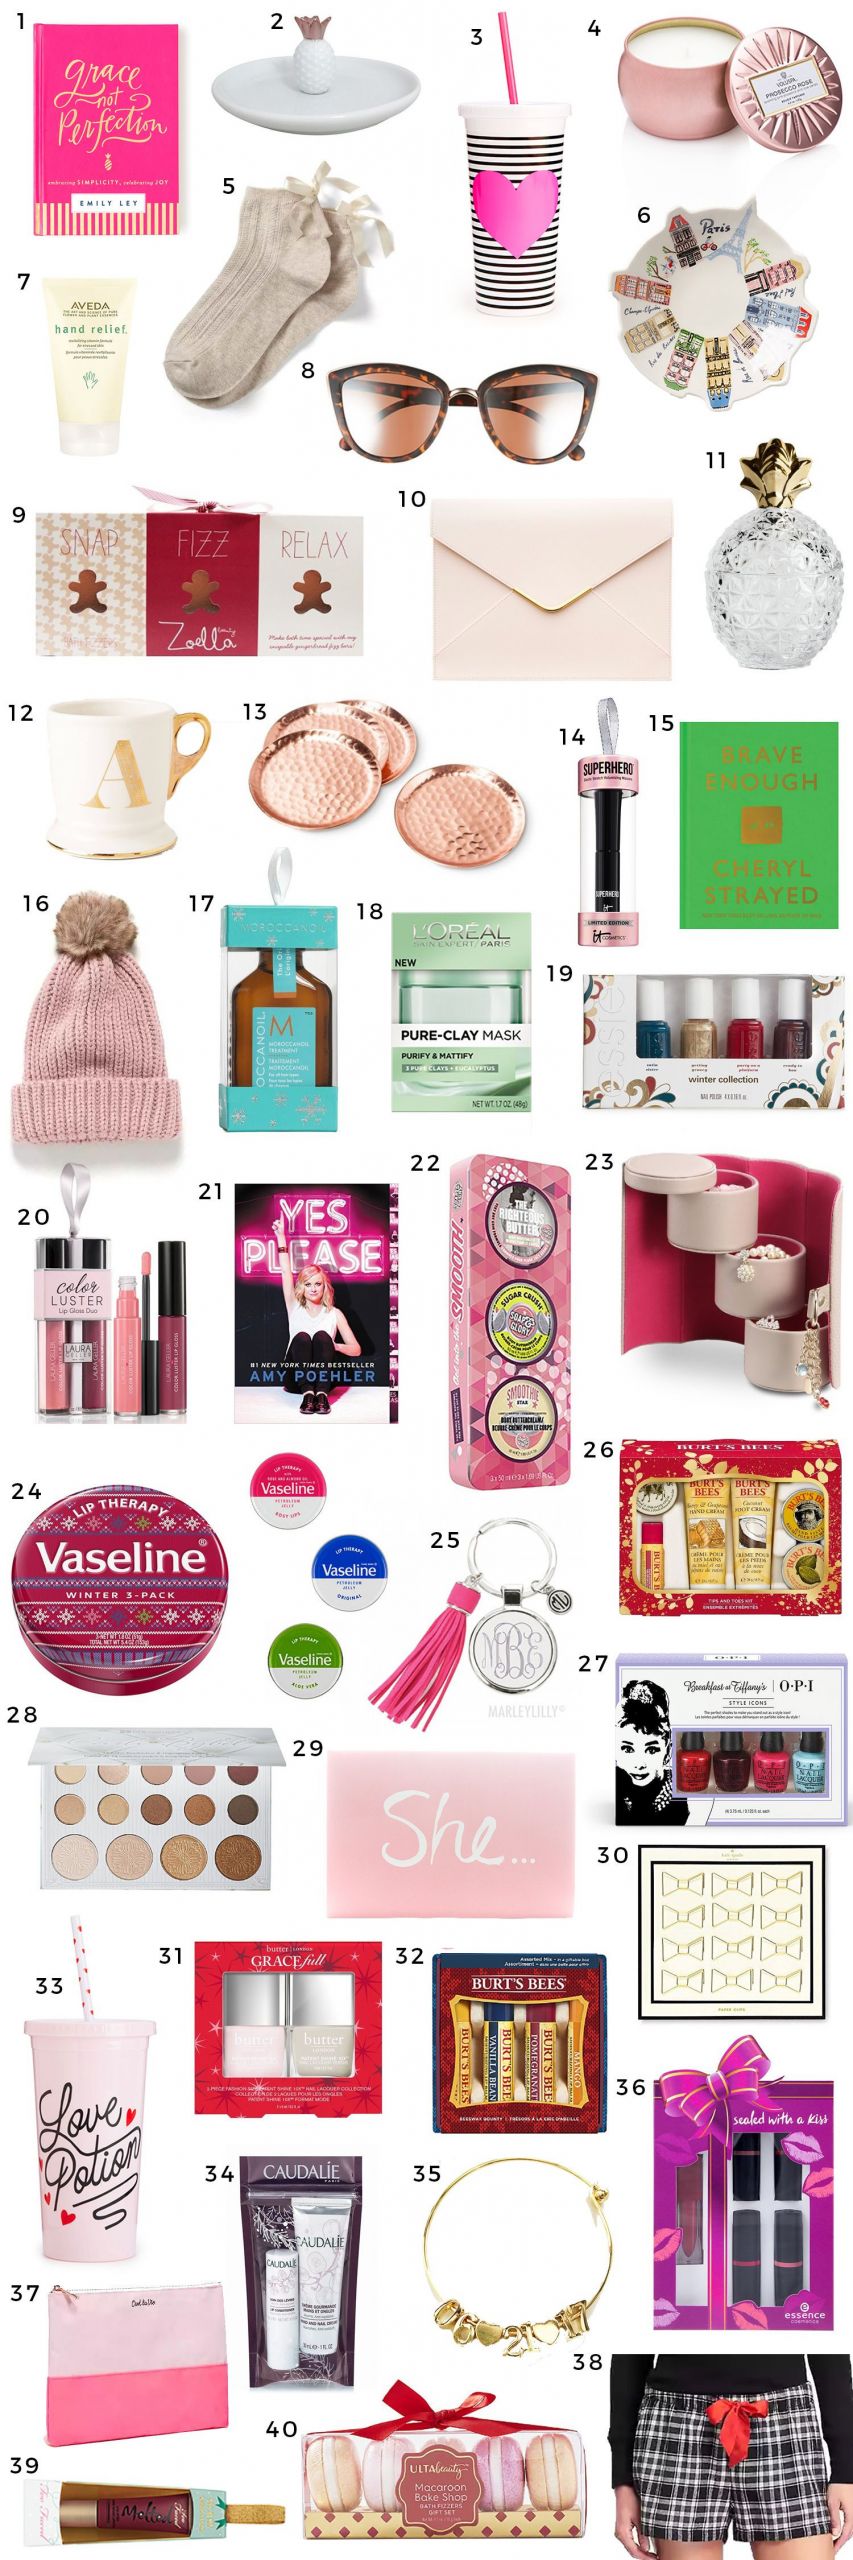 Small Gift Ideas For Girls
 The Best Christmas Gift Ideas for Women Under $15